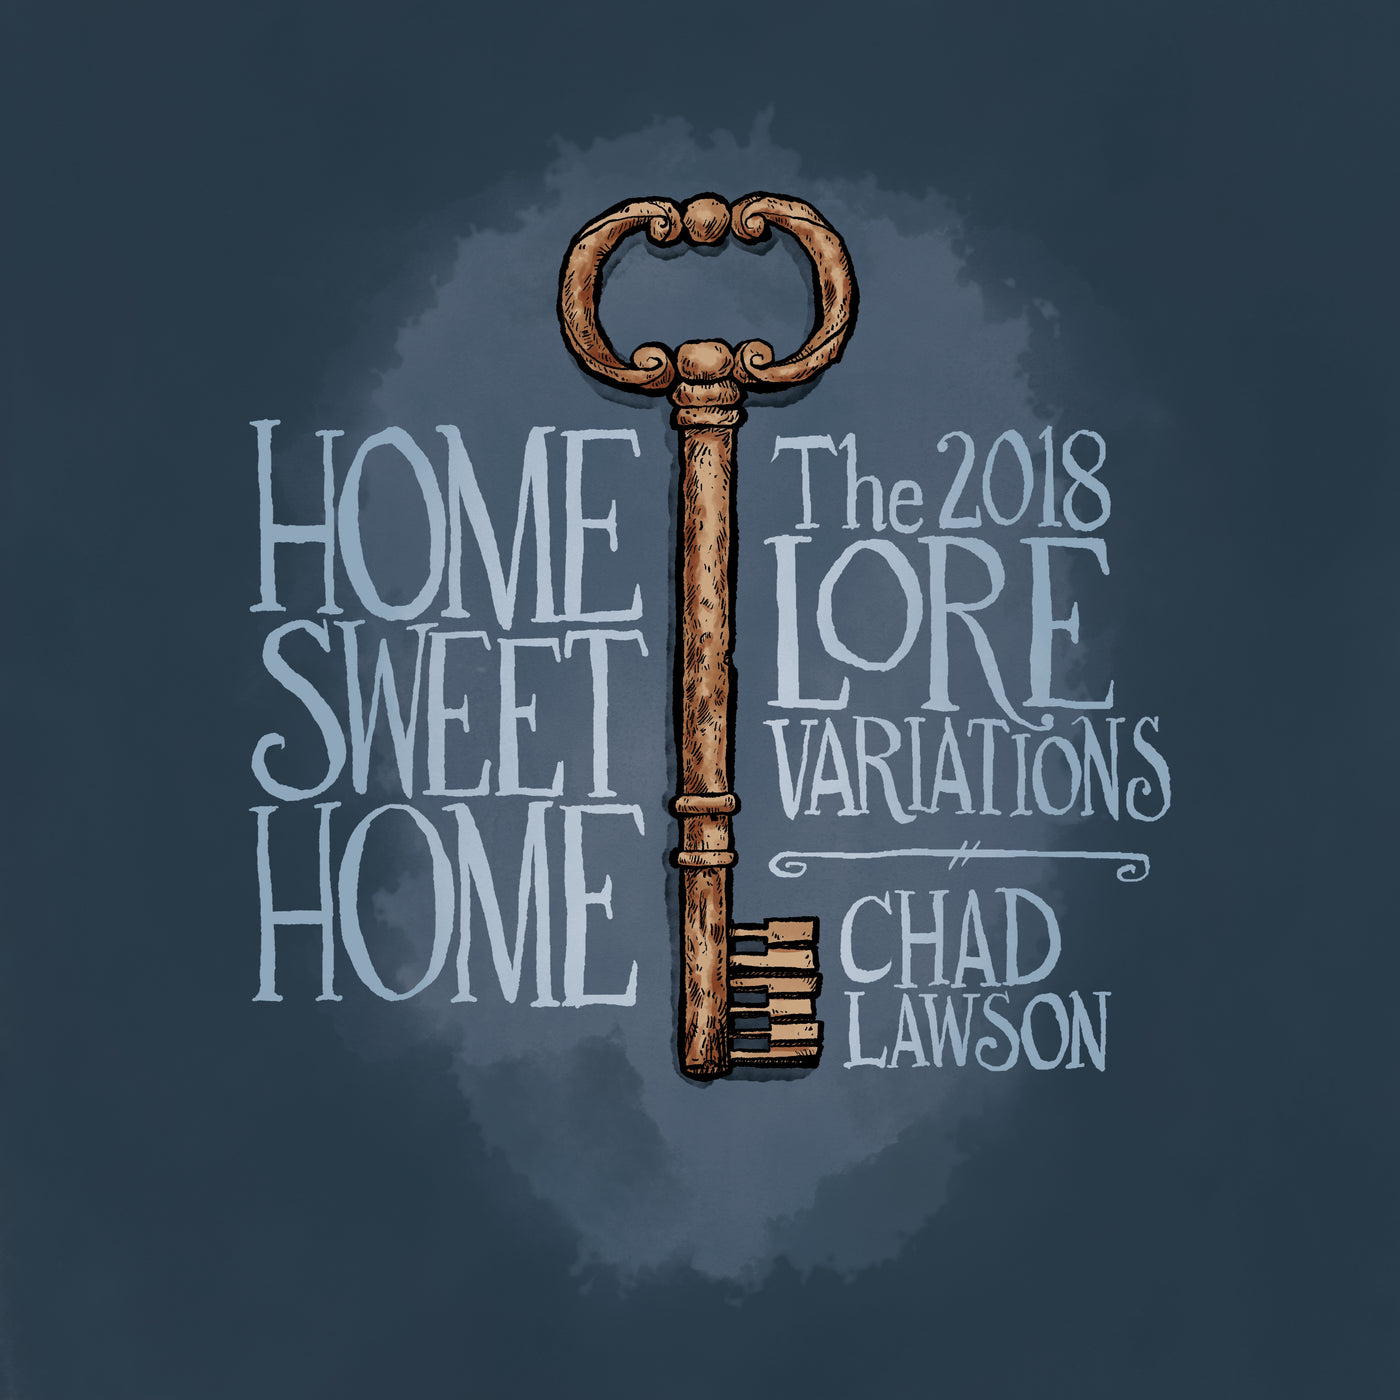 Home Sweet Home - The Lore Variations